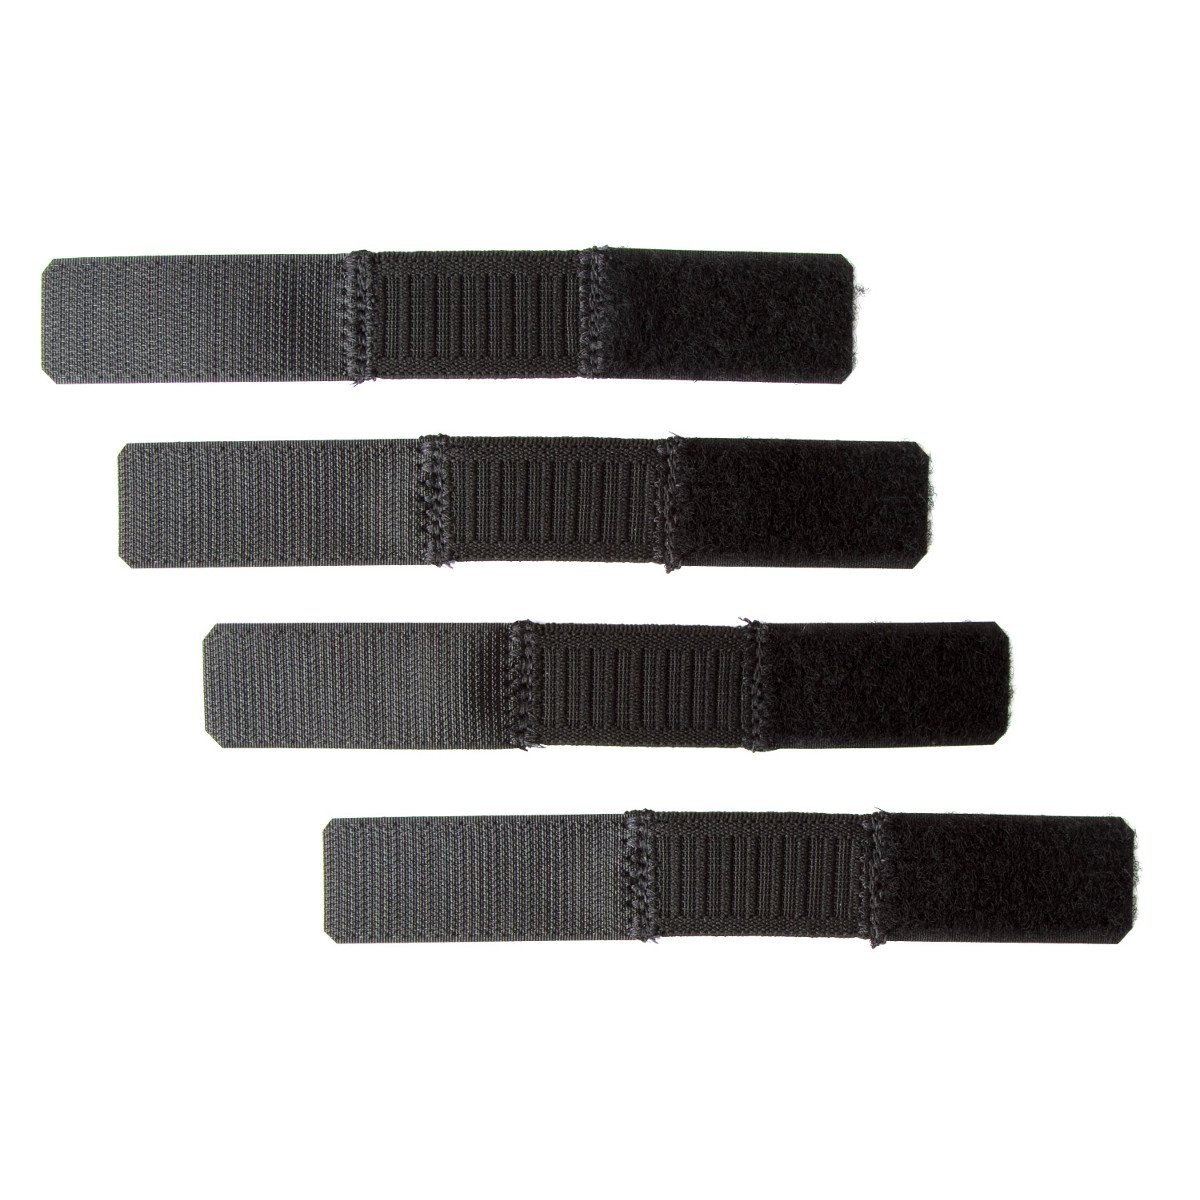 Asterisk Set di Cinturini laterali per Ginocchiere UltraCell/Cell/CytoCell for Knee Brace